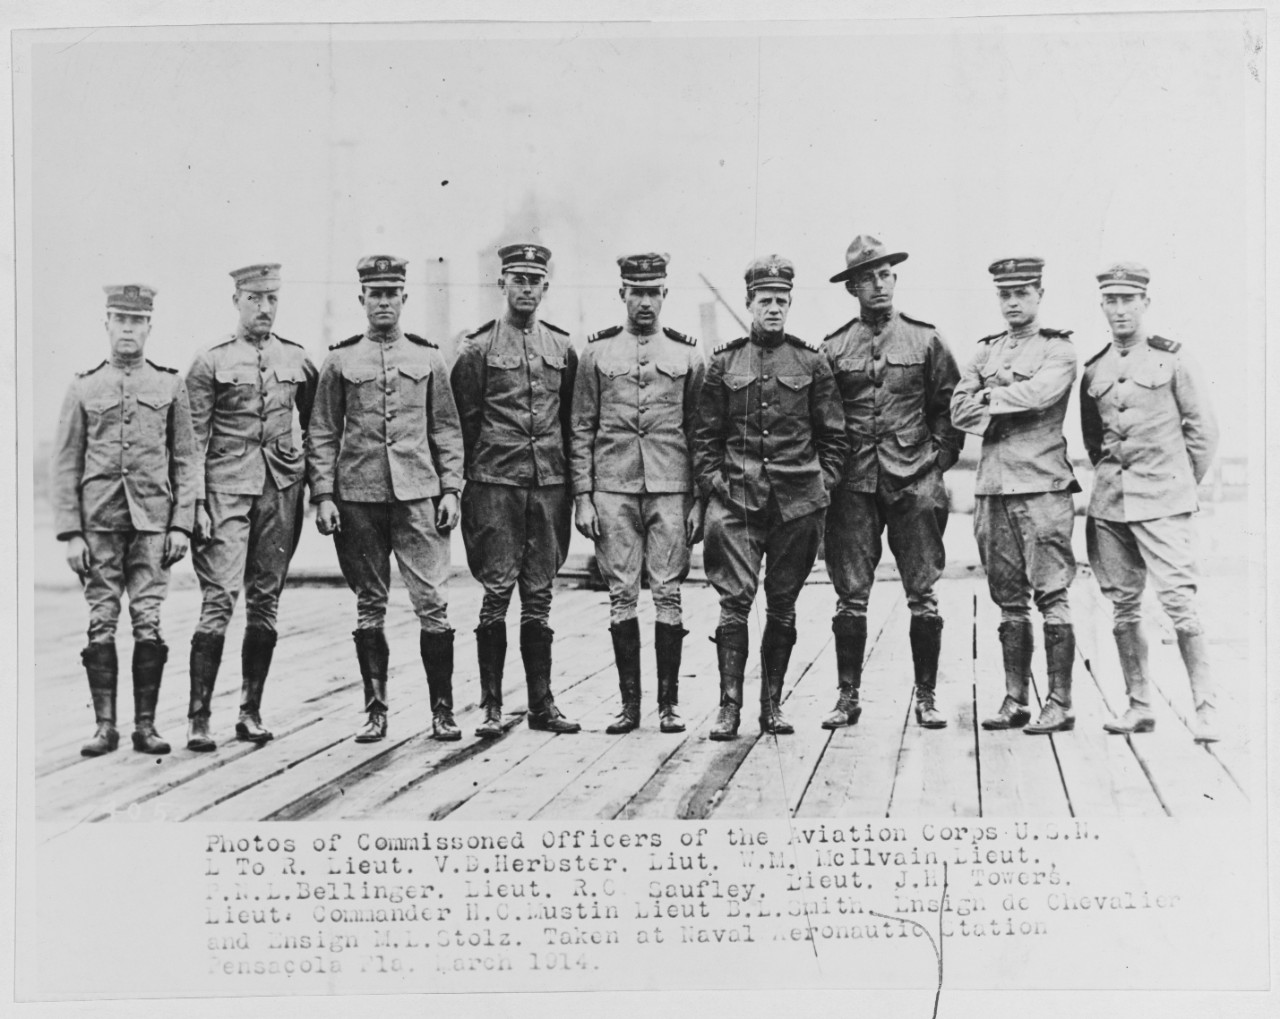 Photos of commissioned officers of the Aviation Corps USN.